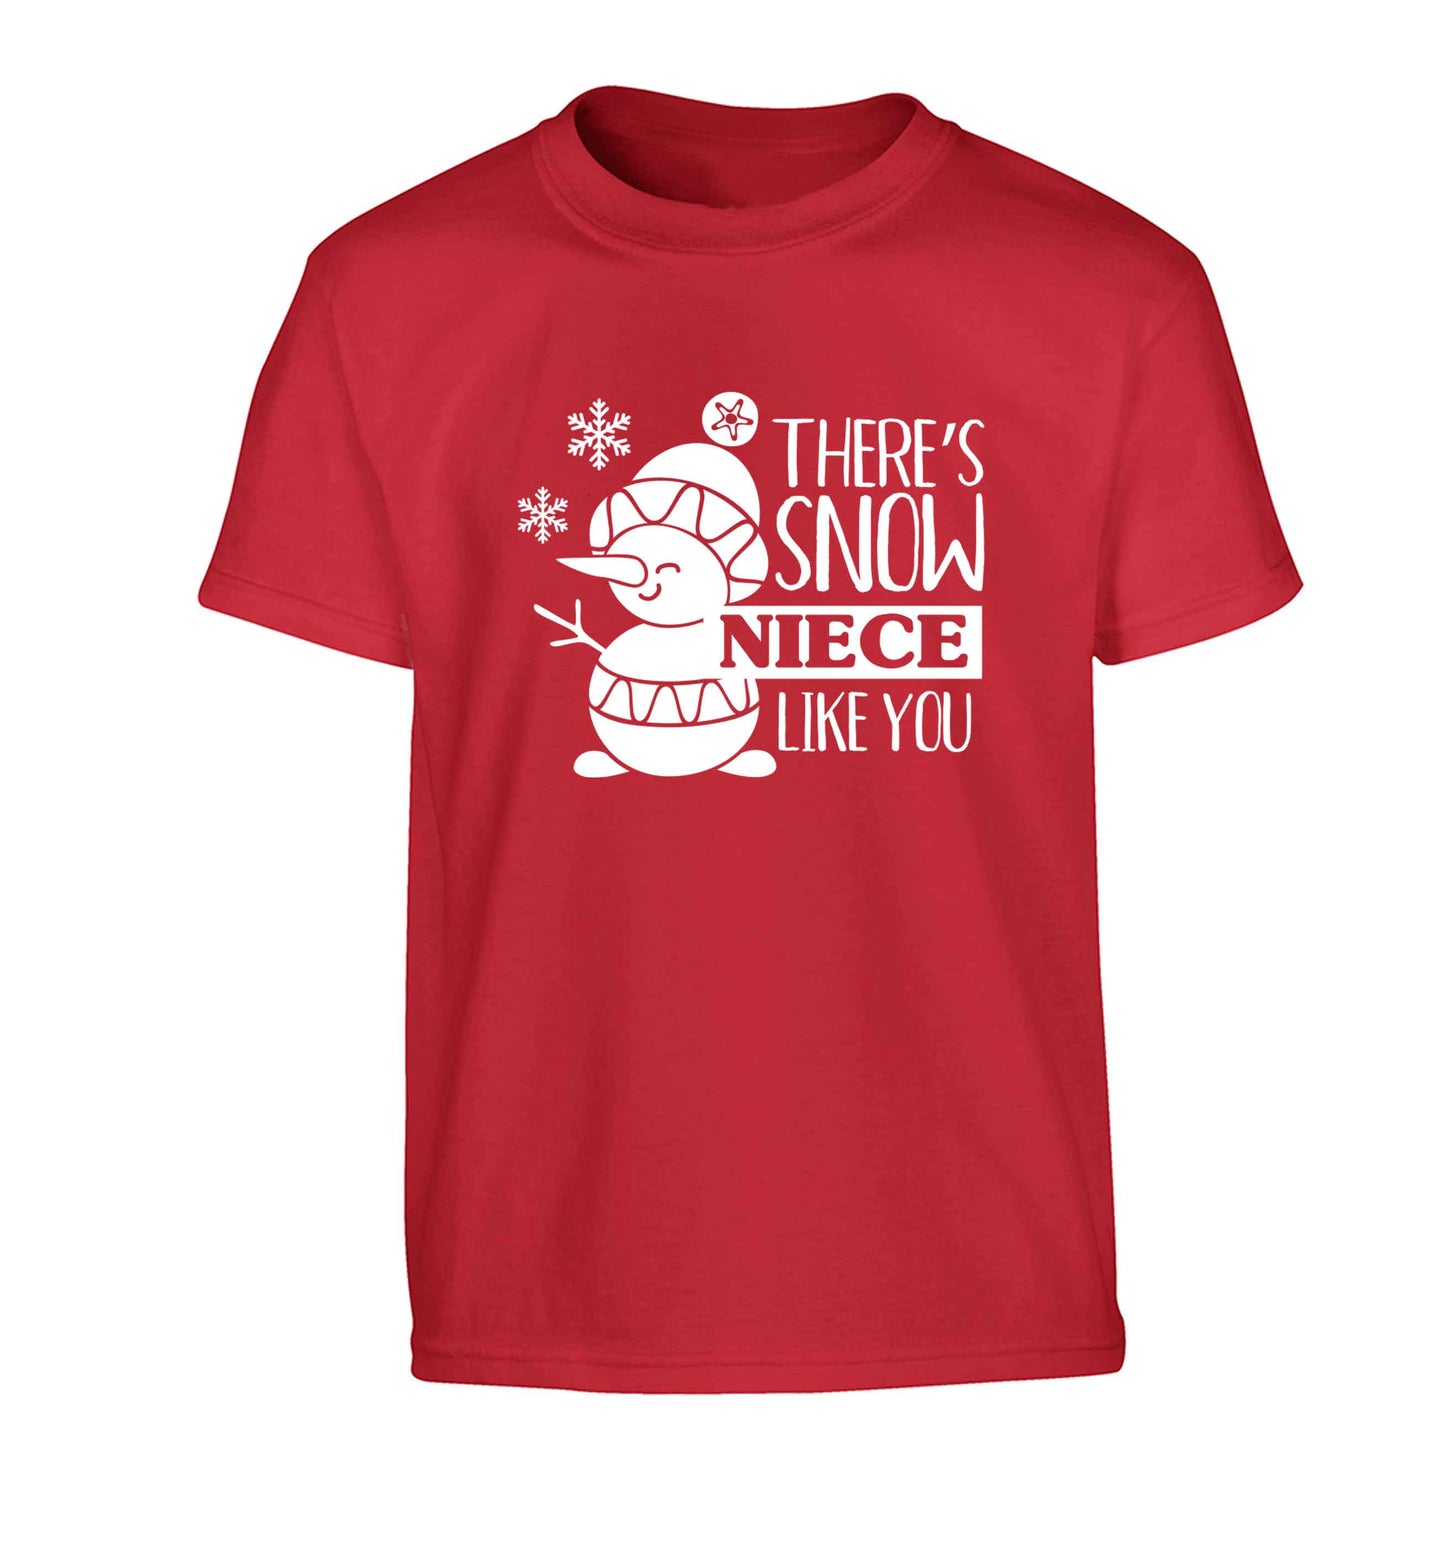 There's snow niece like you Children's red Tshirt 12-13 Years